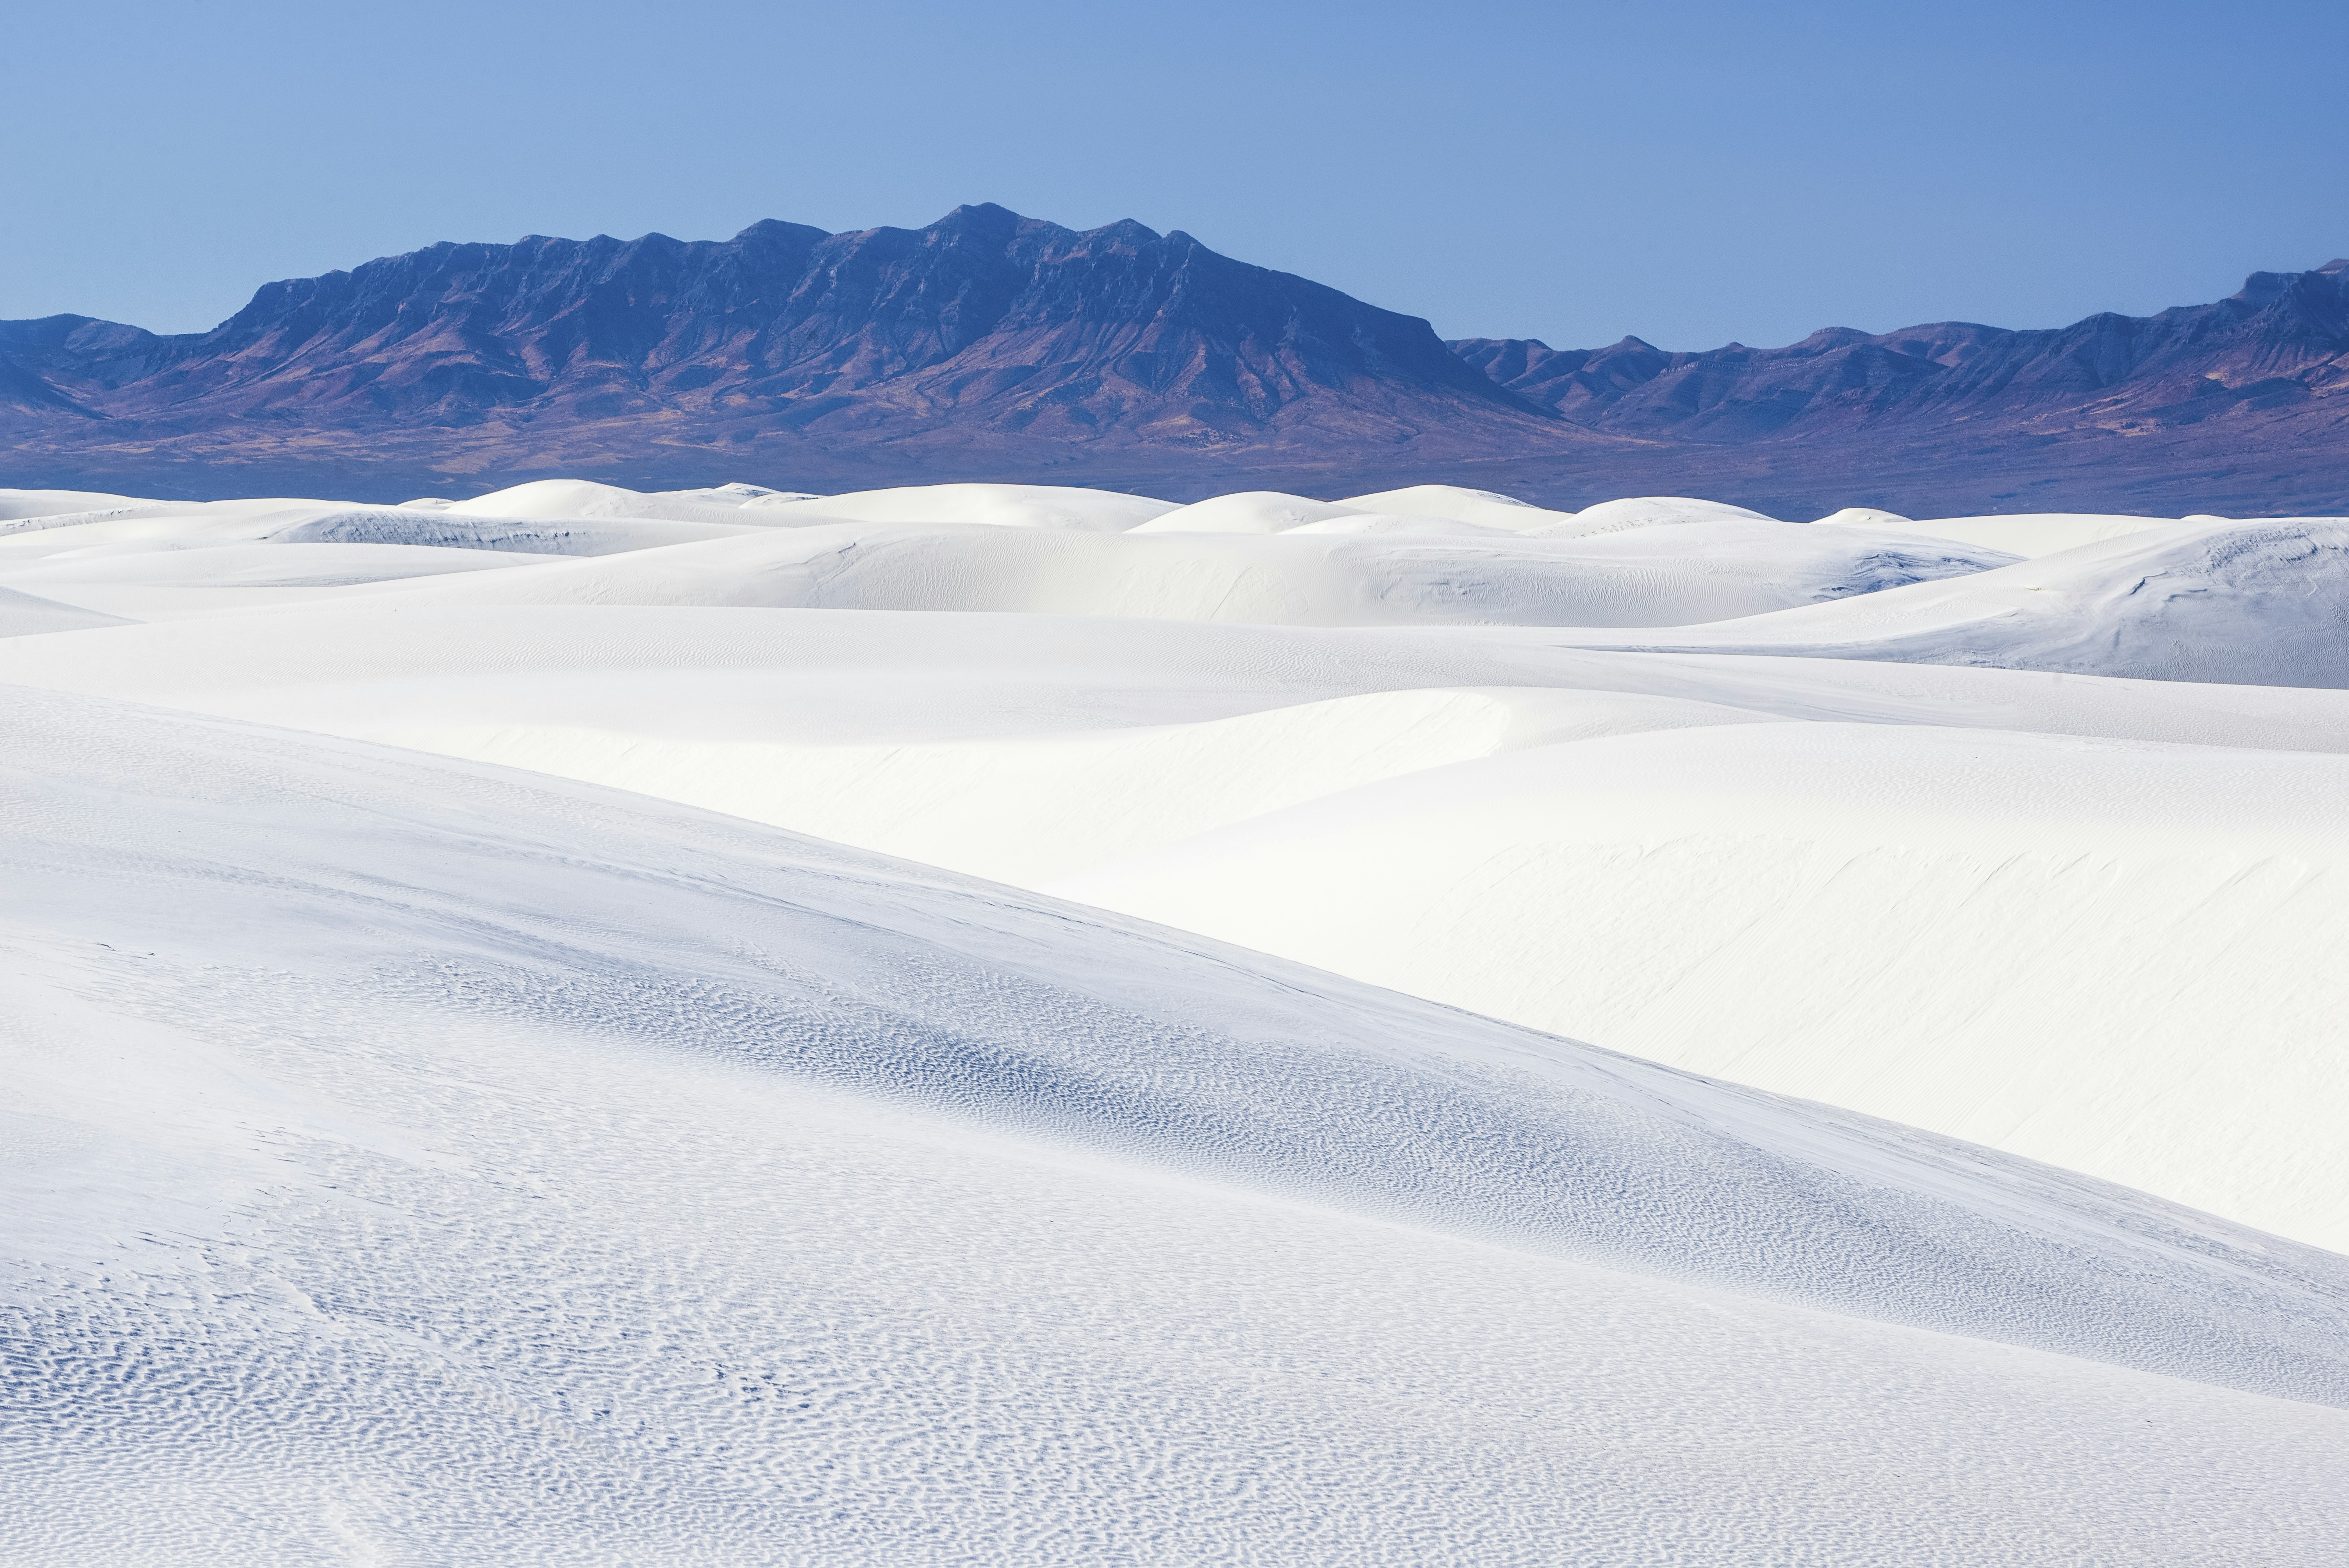 The white gypsum sand dunes spread out like powdered sugar in front of the blue and red San Andres Mountains in White Sands National Park in southern New Mexico